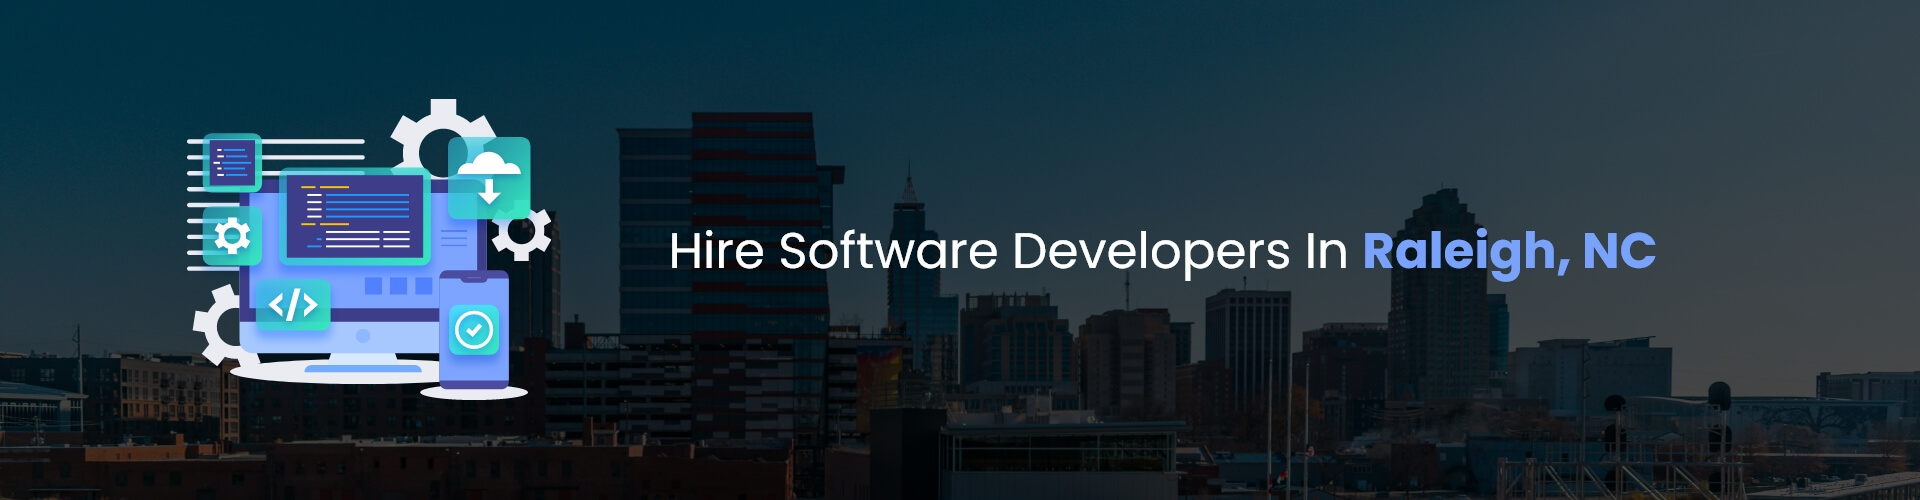 hire software developers in raleigh